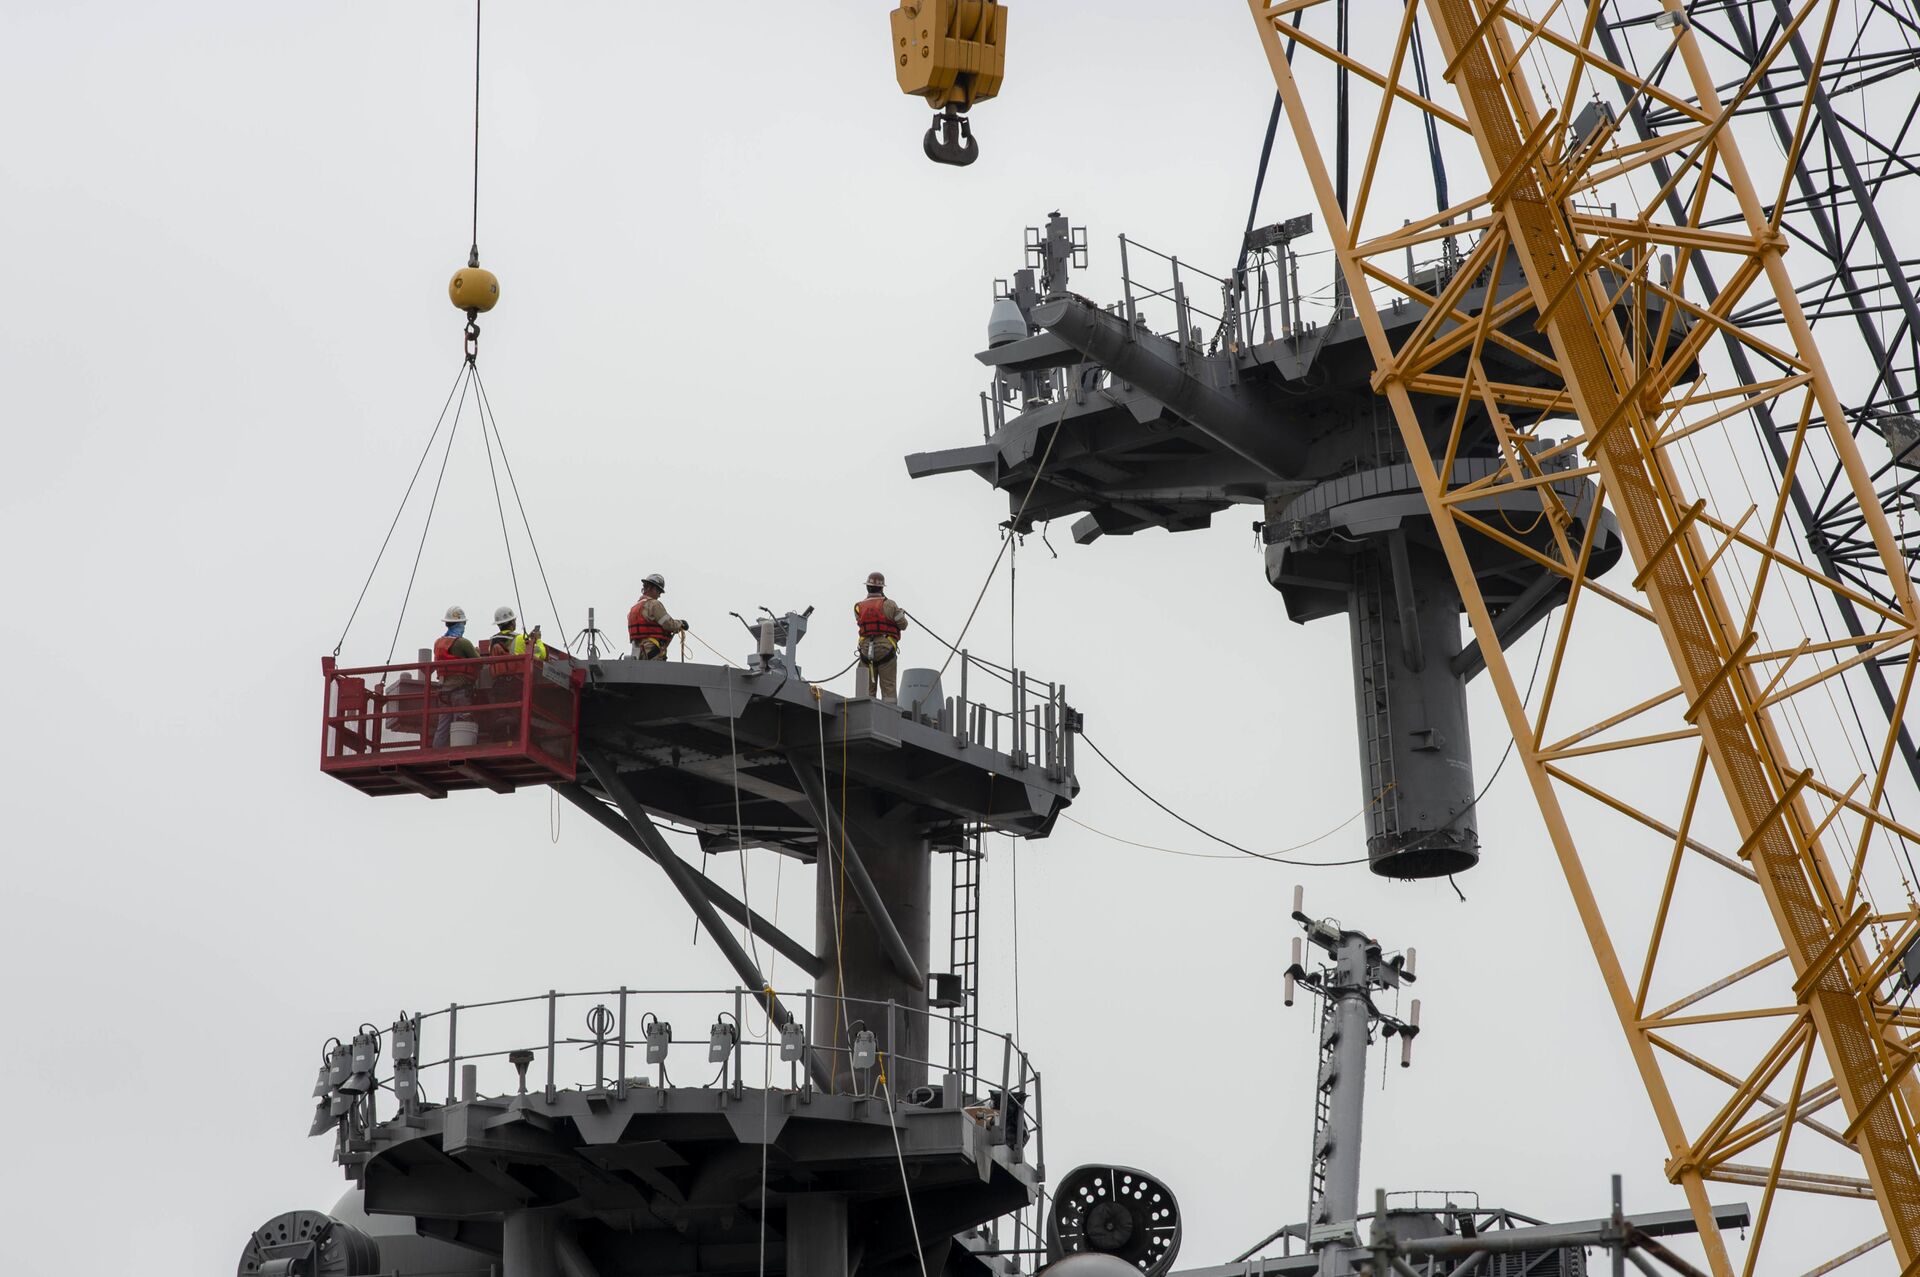 Contractors with Naval Sea Systems Command (NAVSEA) work to remove the aft mast aboard the amphibious assault ship USS Bonhomme Richard (LHD-6). - Sputnik International, 1920, 07.09.2021